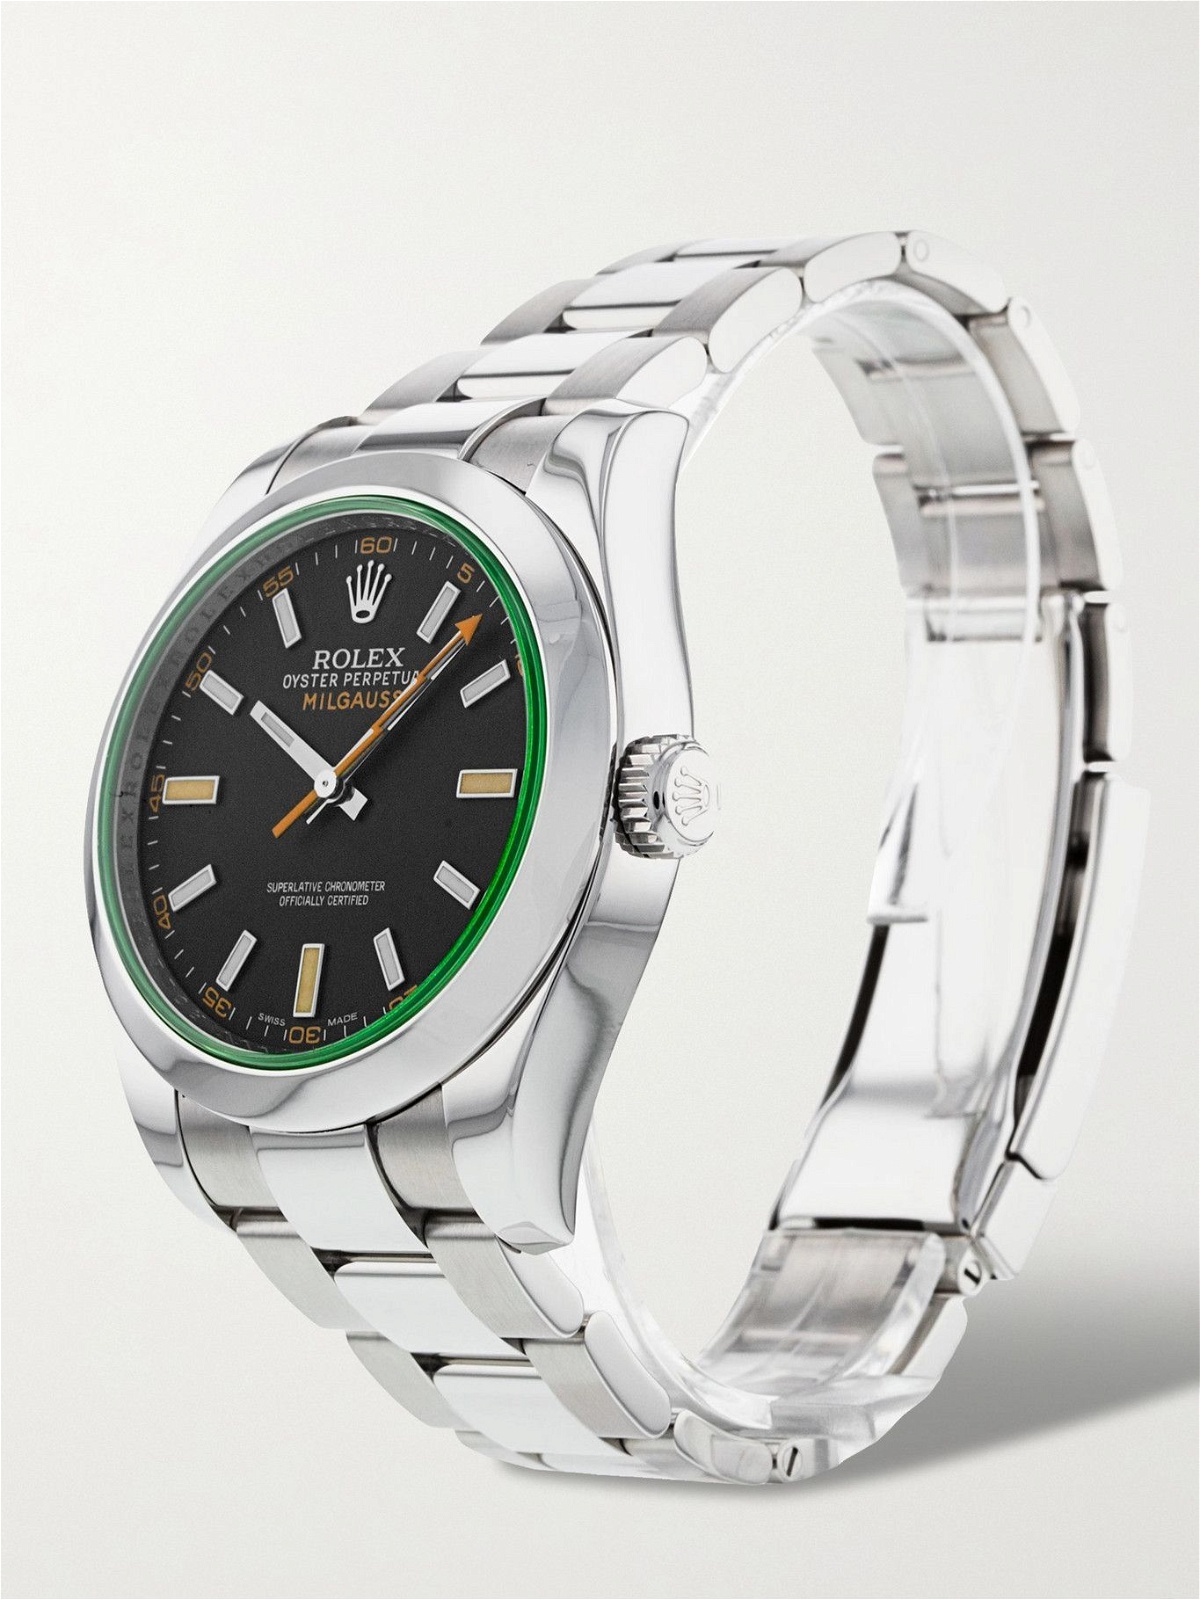 ROLEX - Pre-Owned 2013 Milgauss Automatic 40mm Oystersteel Watch, Ref. No. 116400 GV